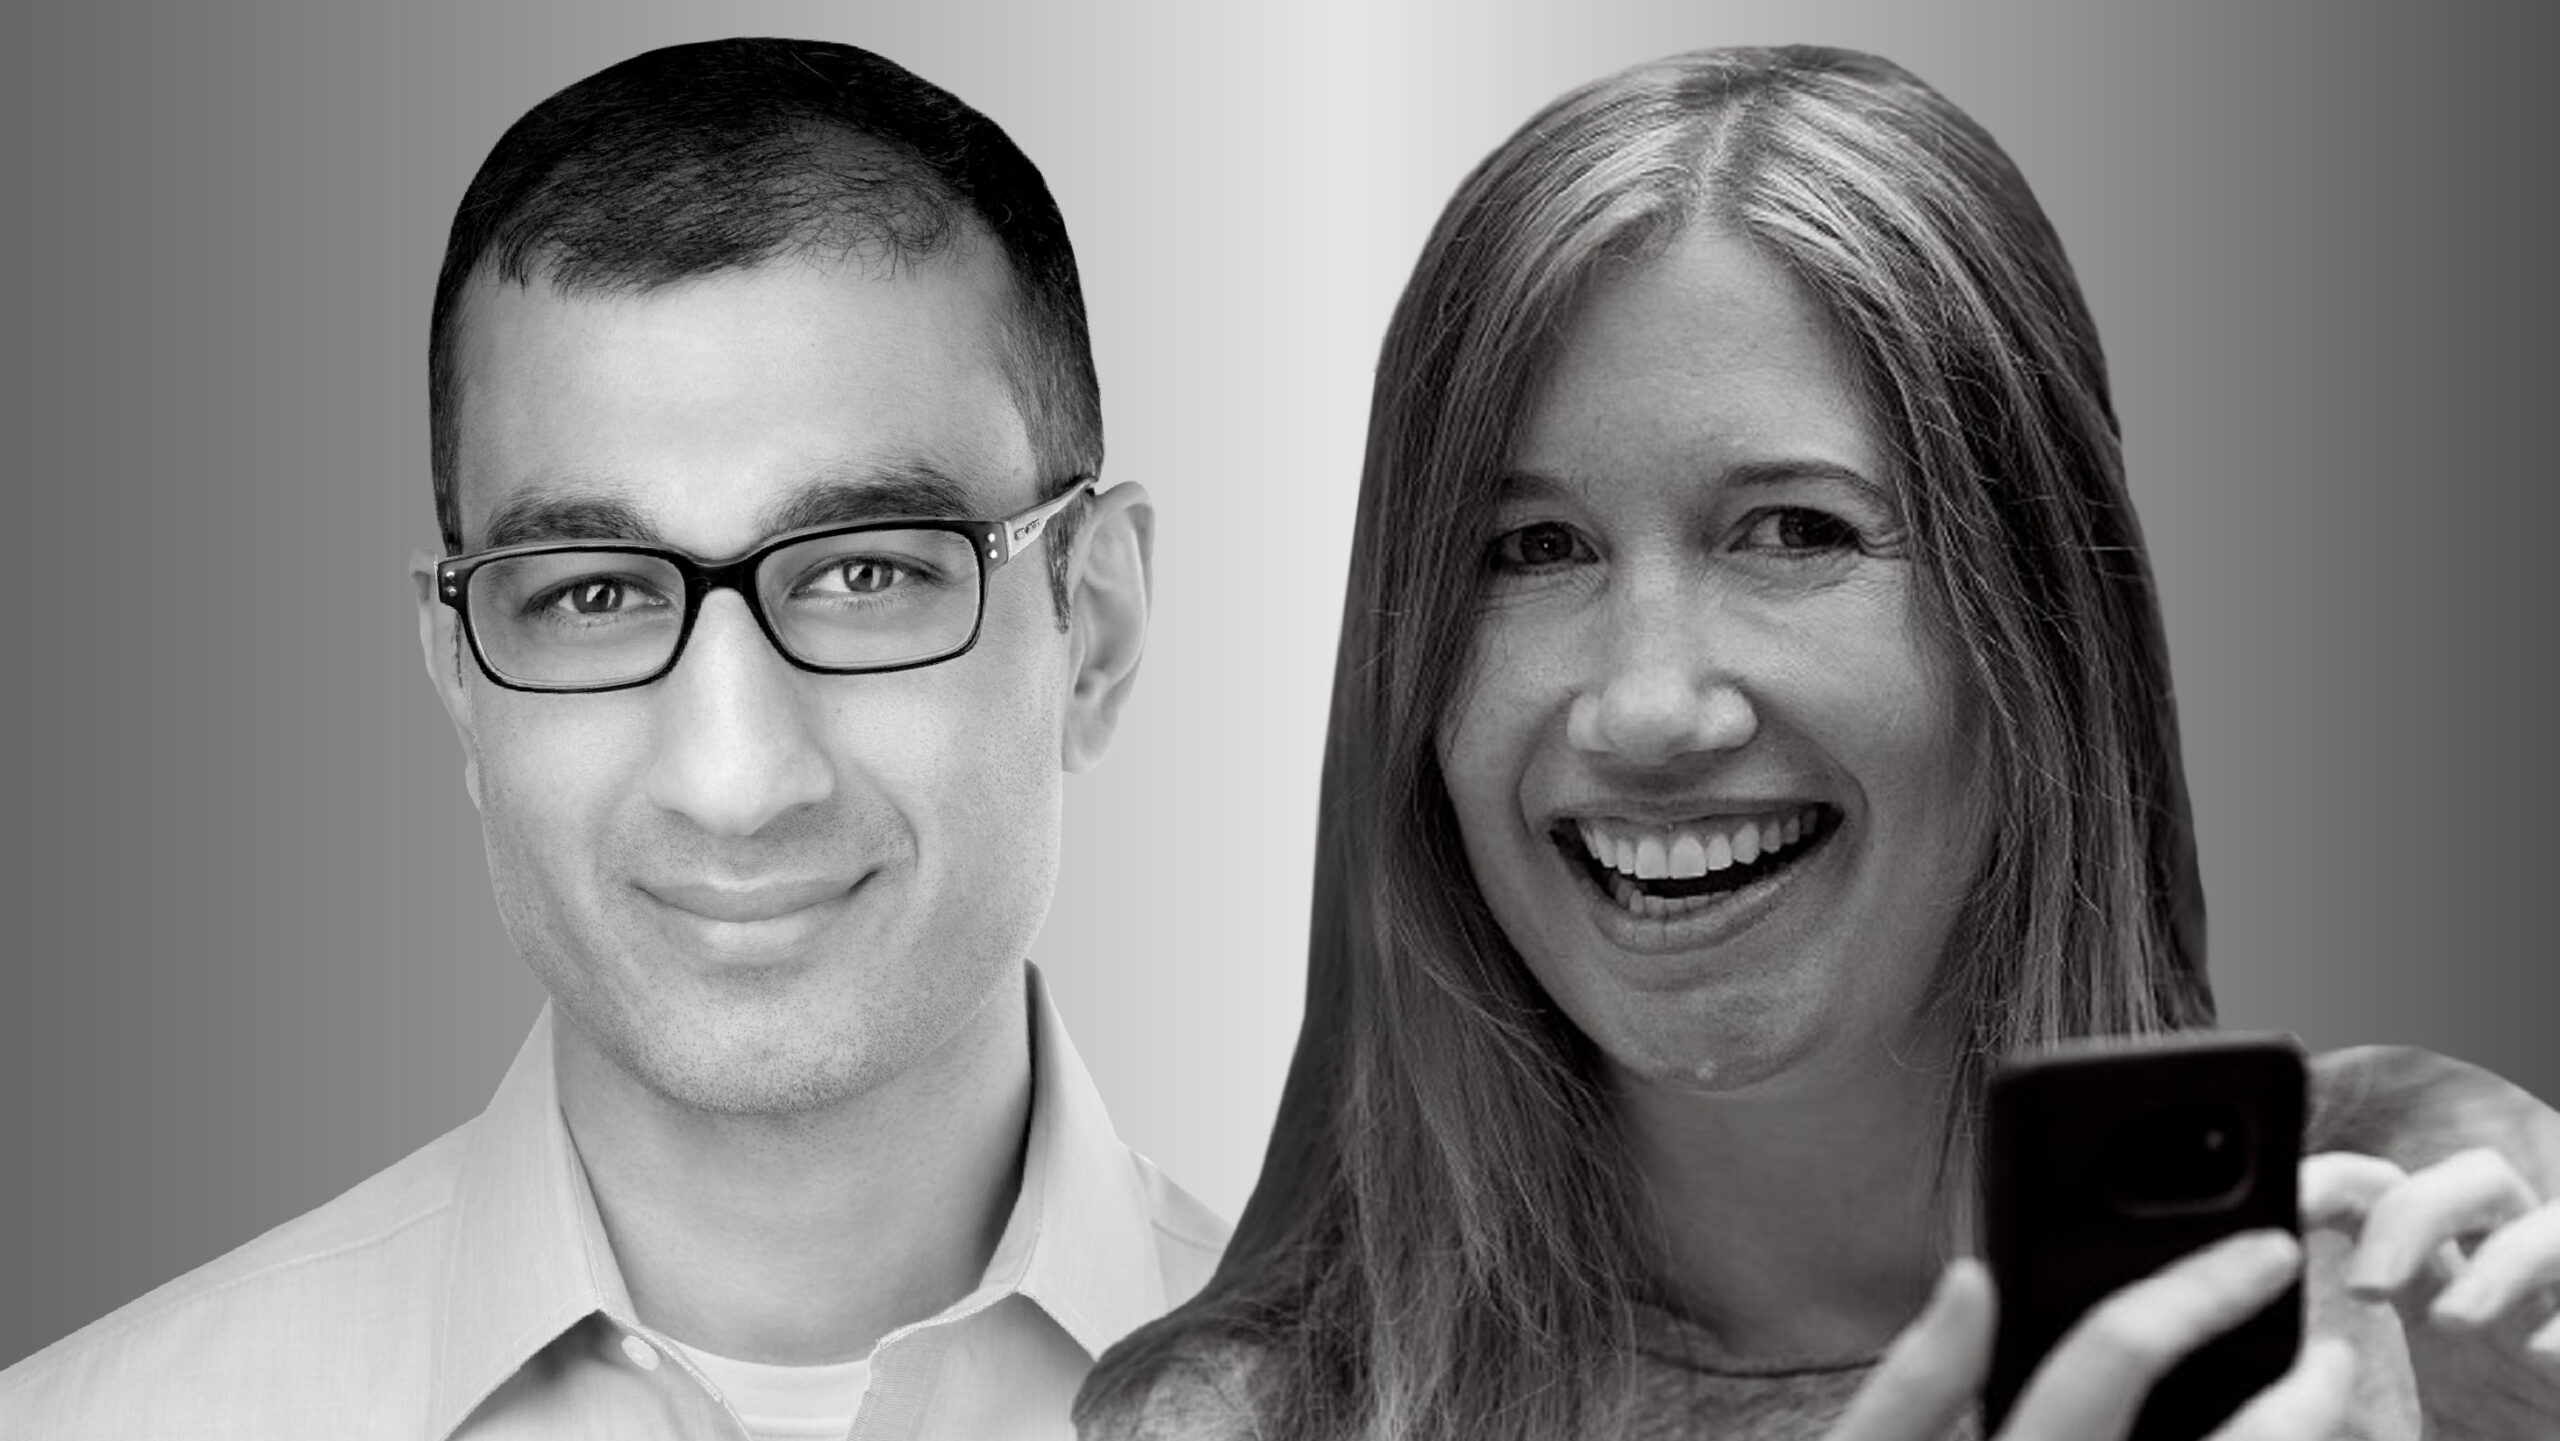 Portraits of Microsoft researchers Sid Suri and Jaime Teevan photographed in black and white. Both smile and look forward. Teevan, on the right, is holding a cell phone in the lower right of the frame.